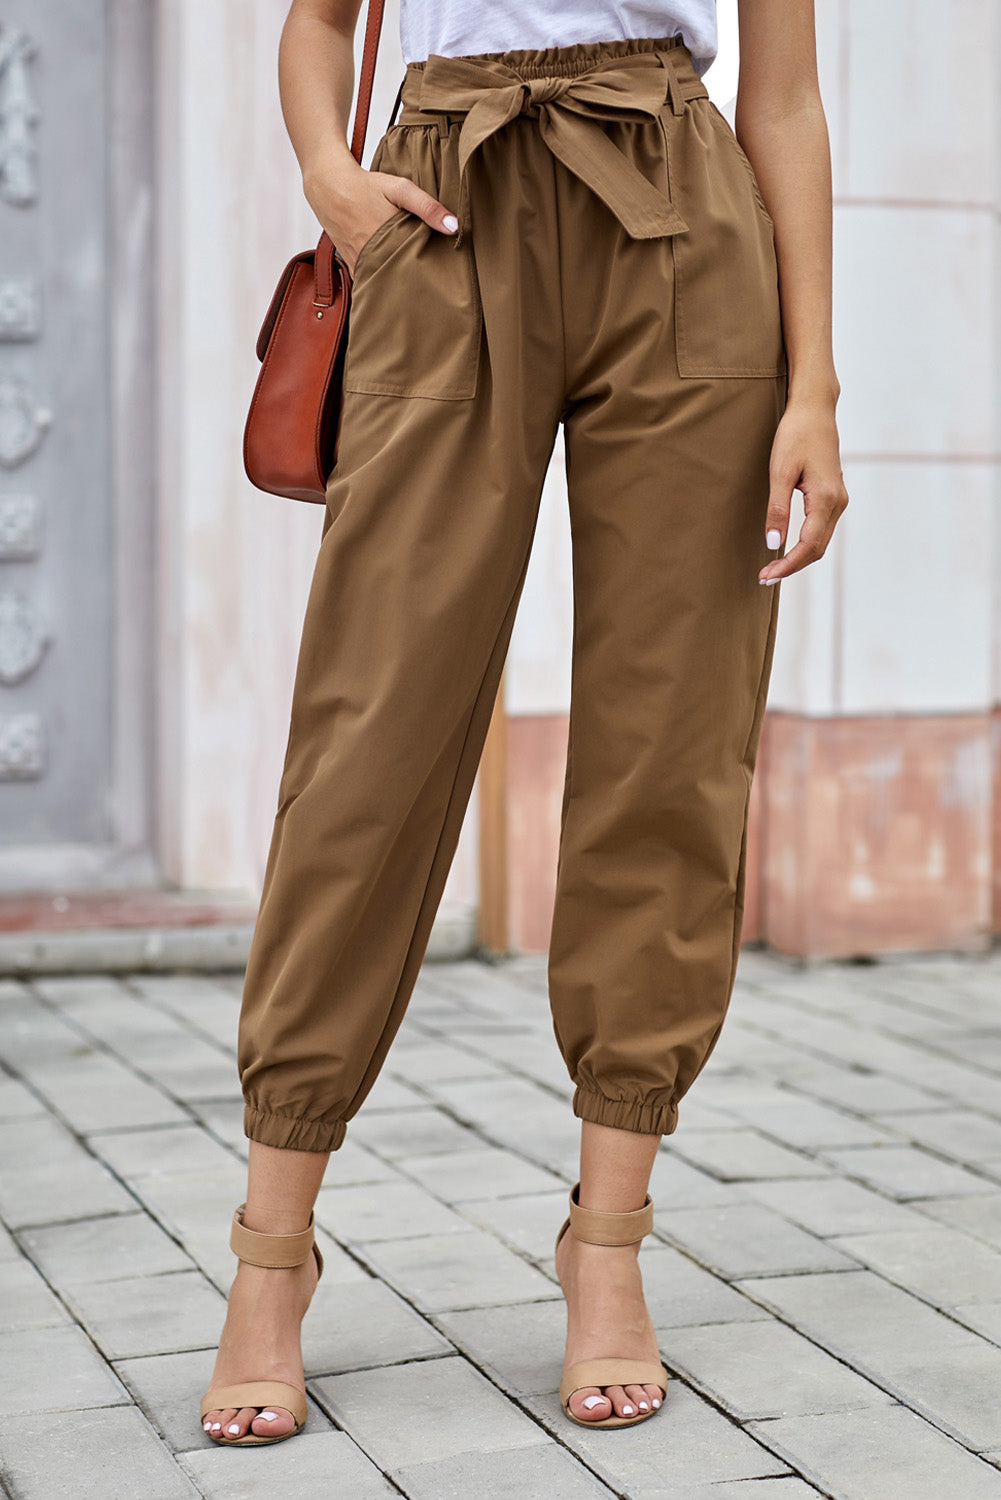 Solid Color Frock-style Pants with Belt